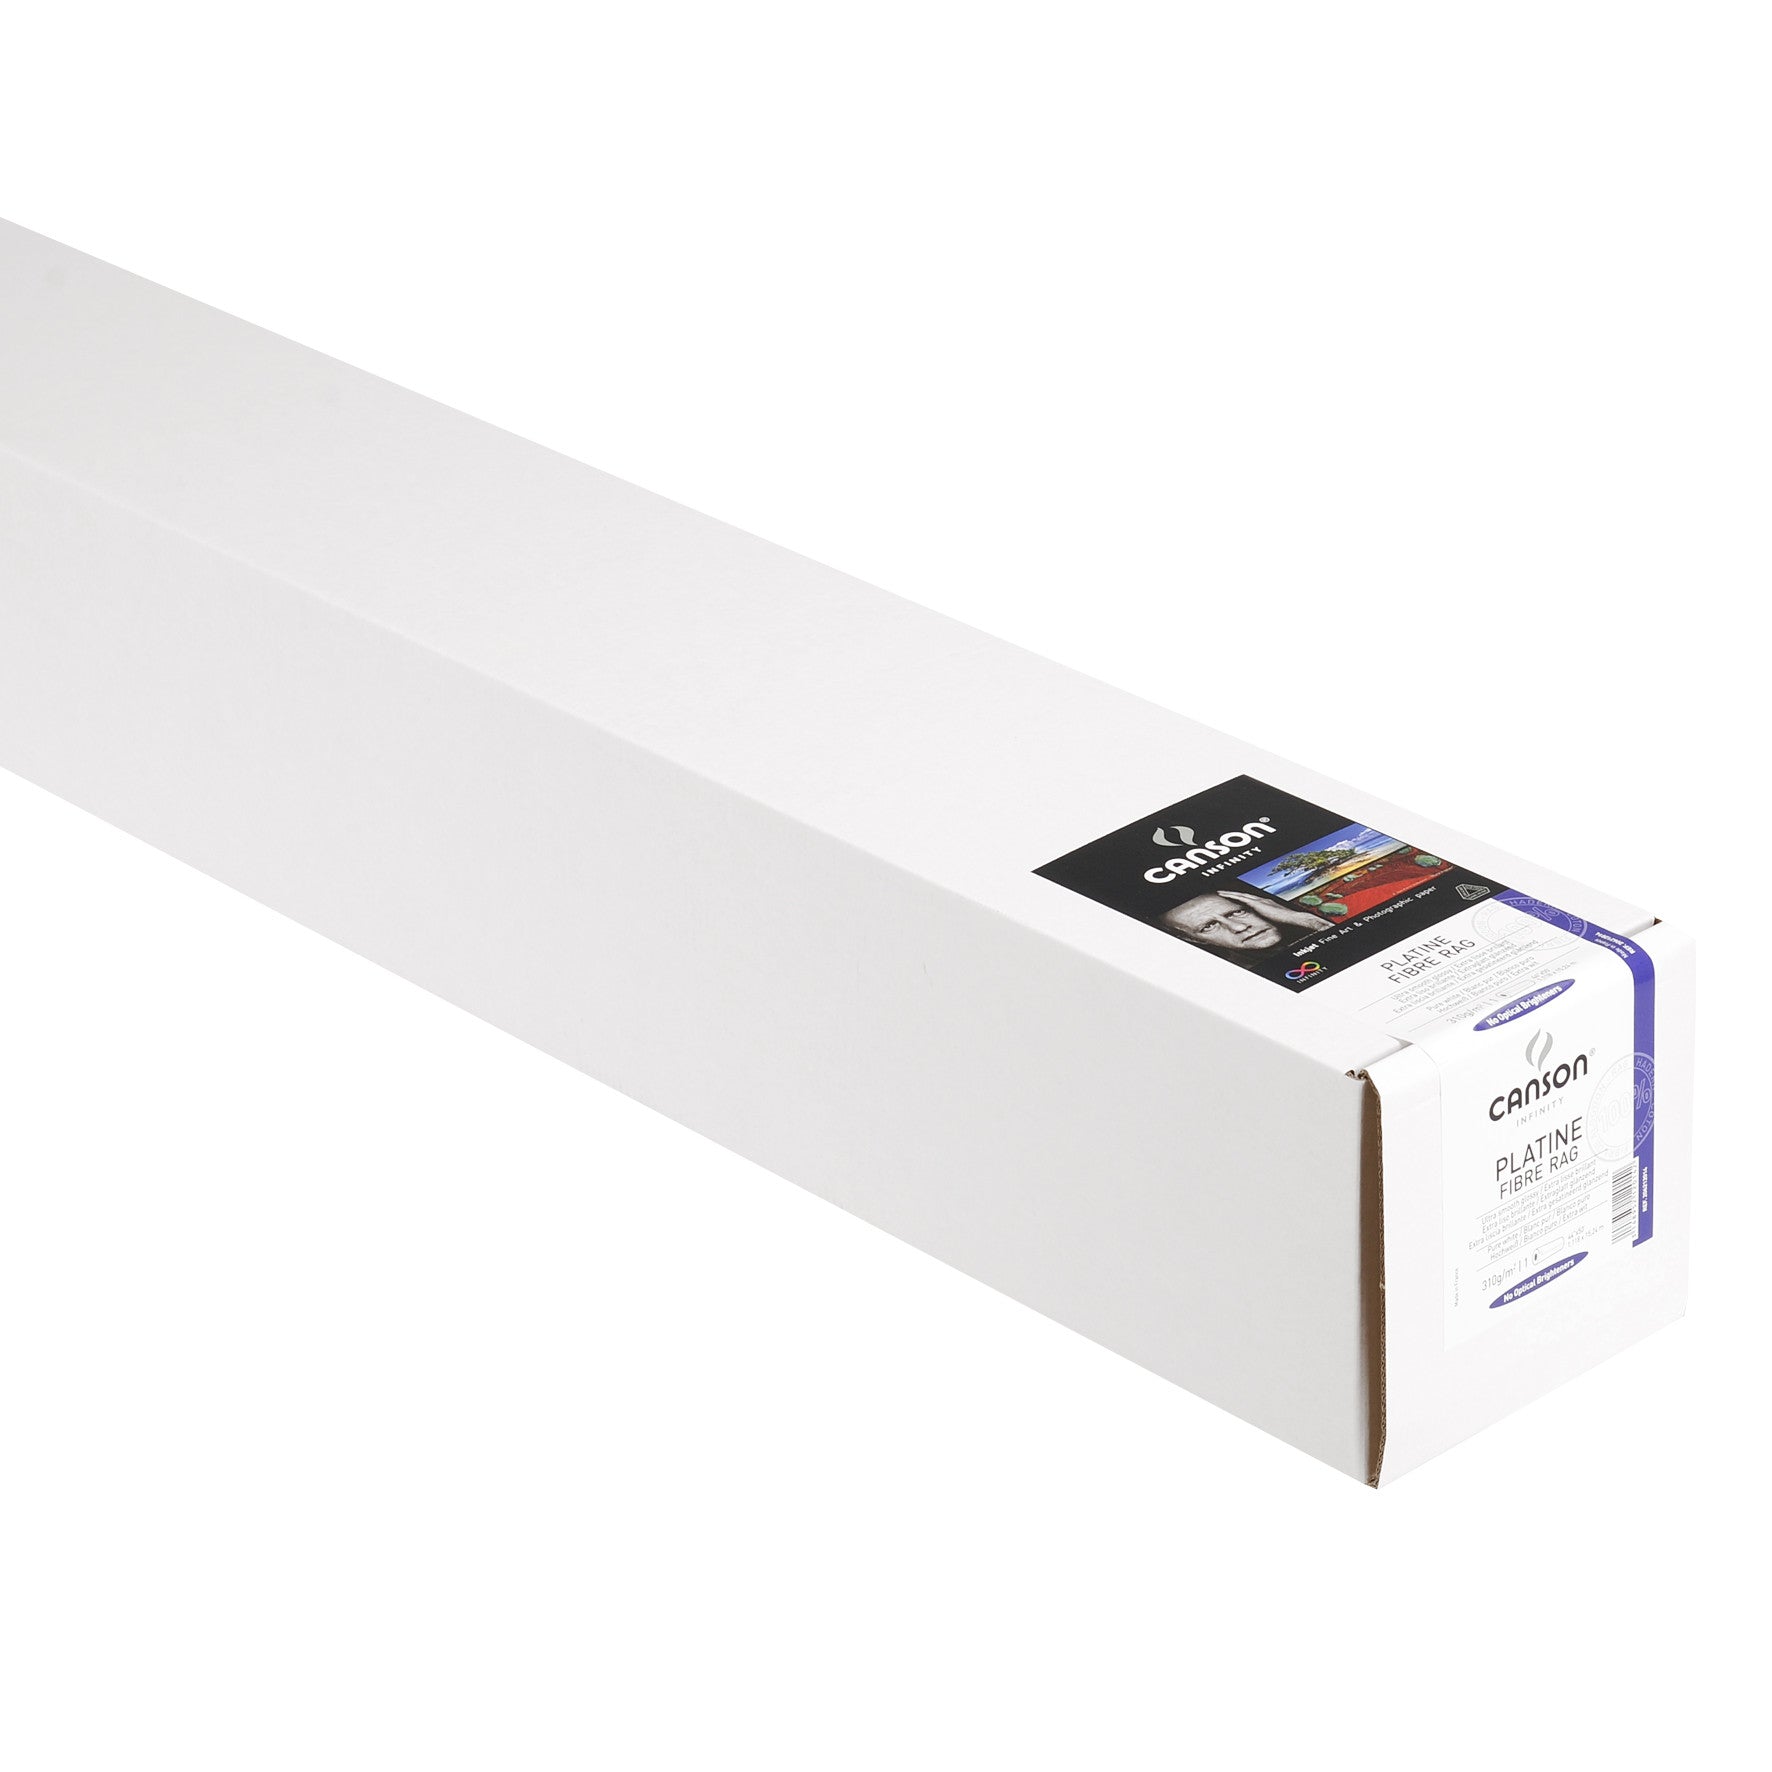 Canson Infinity Platine Fibre Rag - 310gsm - 44"x50' roll - Wall Your Photos